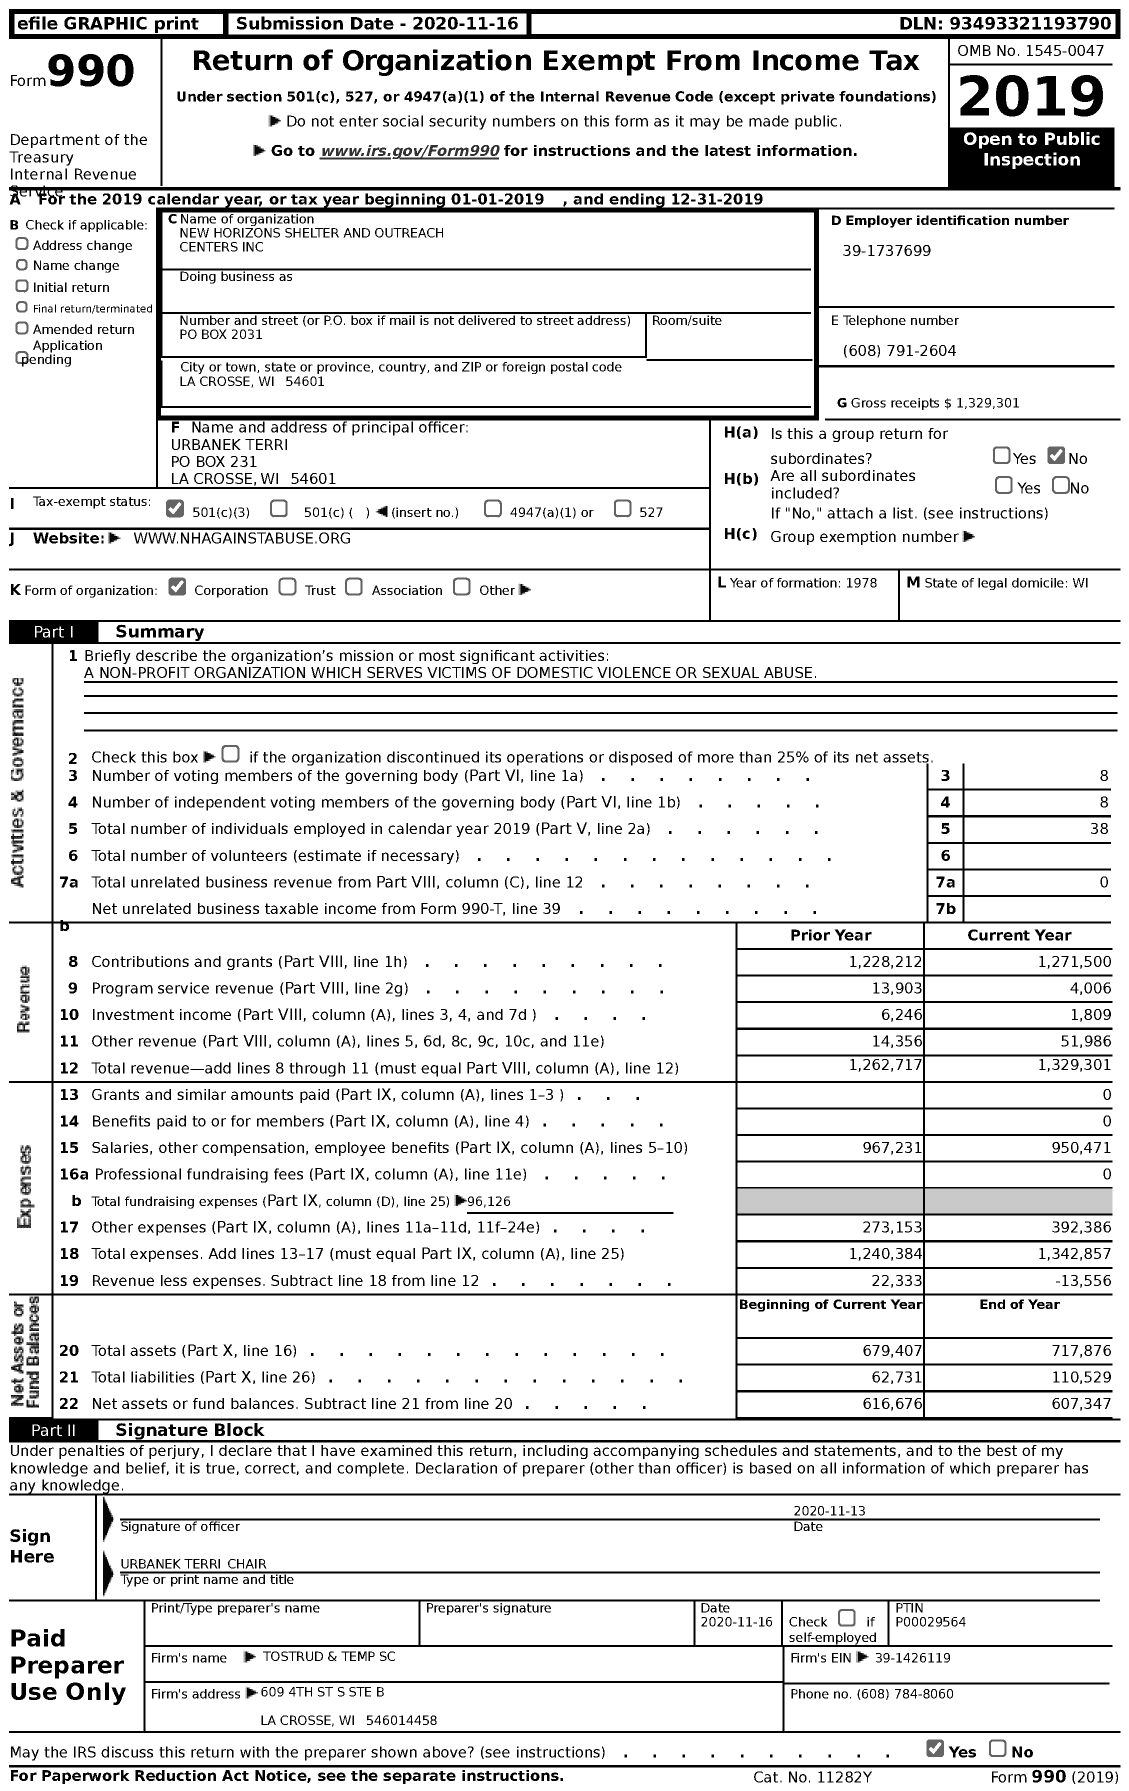 Image of first page of 2019 Form 990 for New Horizons Shelter and Outreach Centers